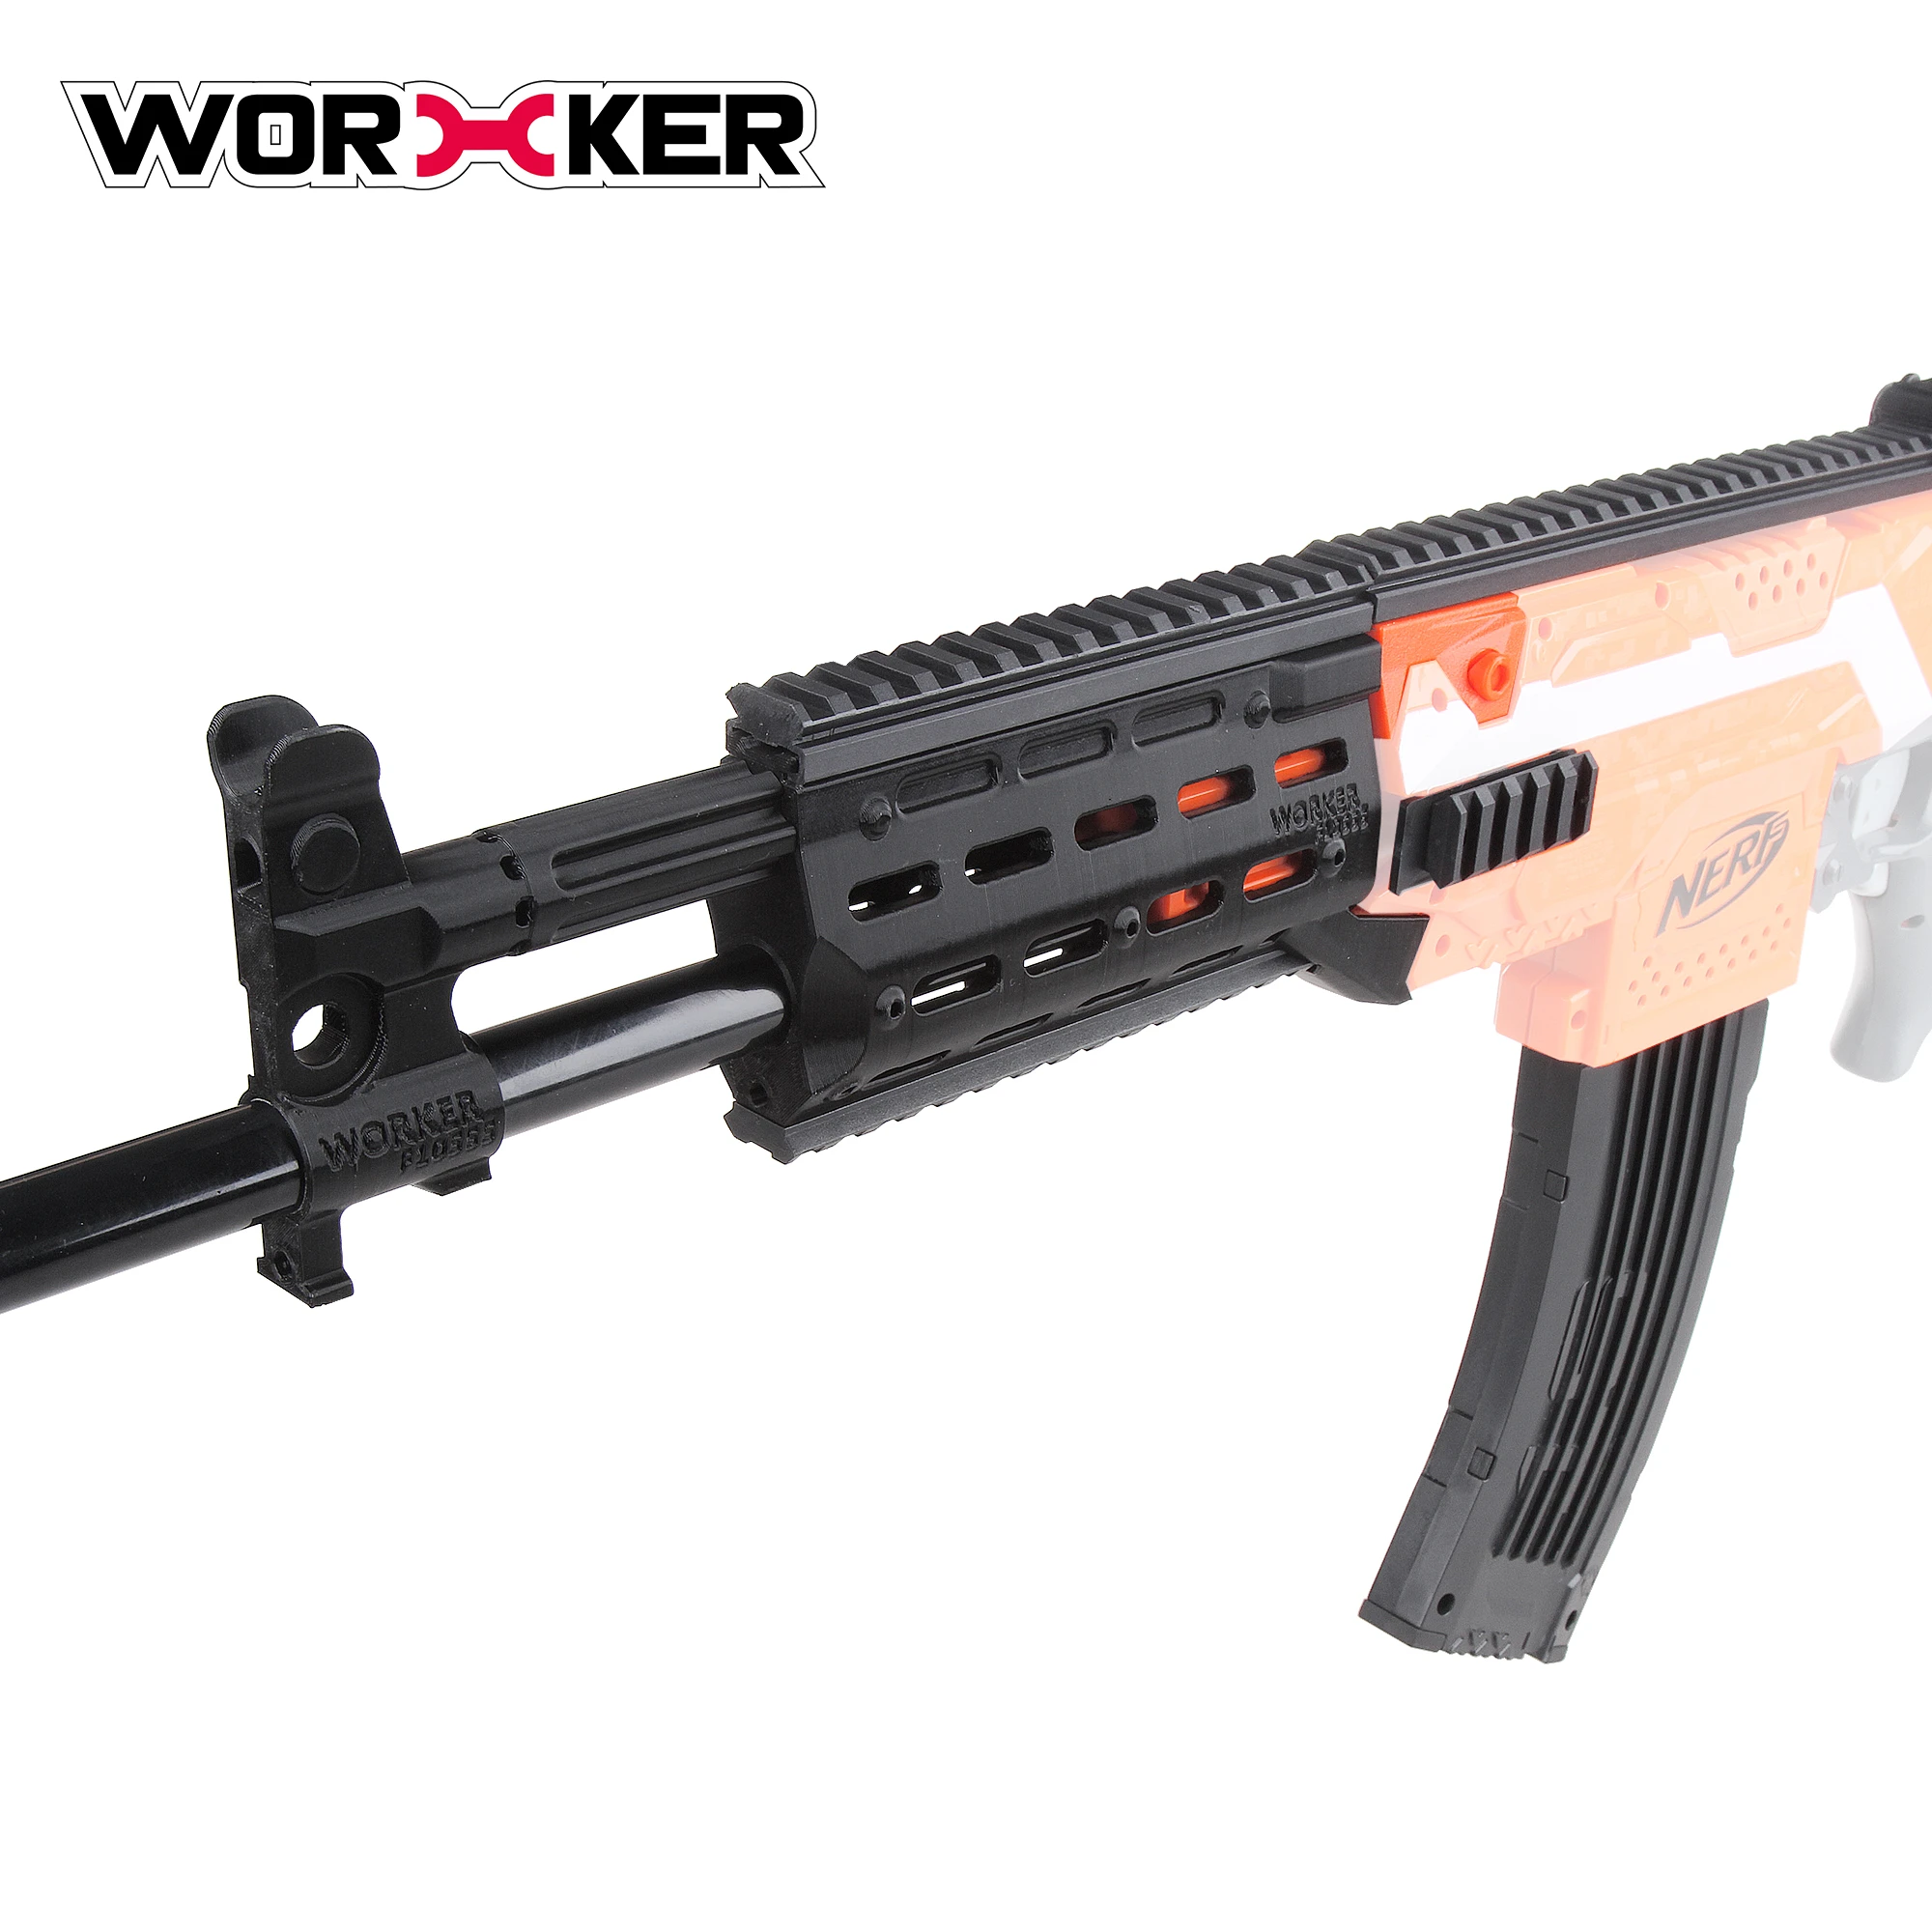 Worker AK-12 Section A-2 Toys Gun Soft Bullets Plastic Gun Toy for Boys and Girls